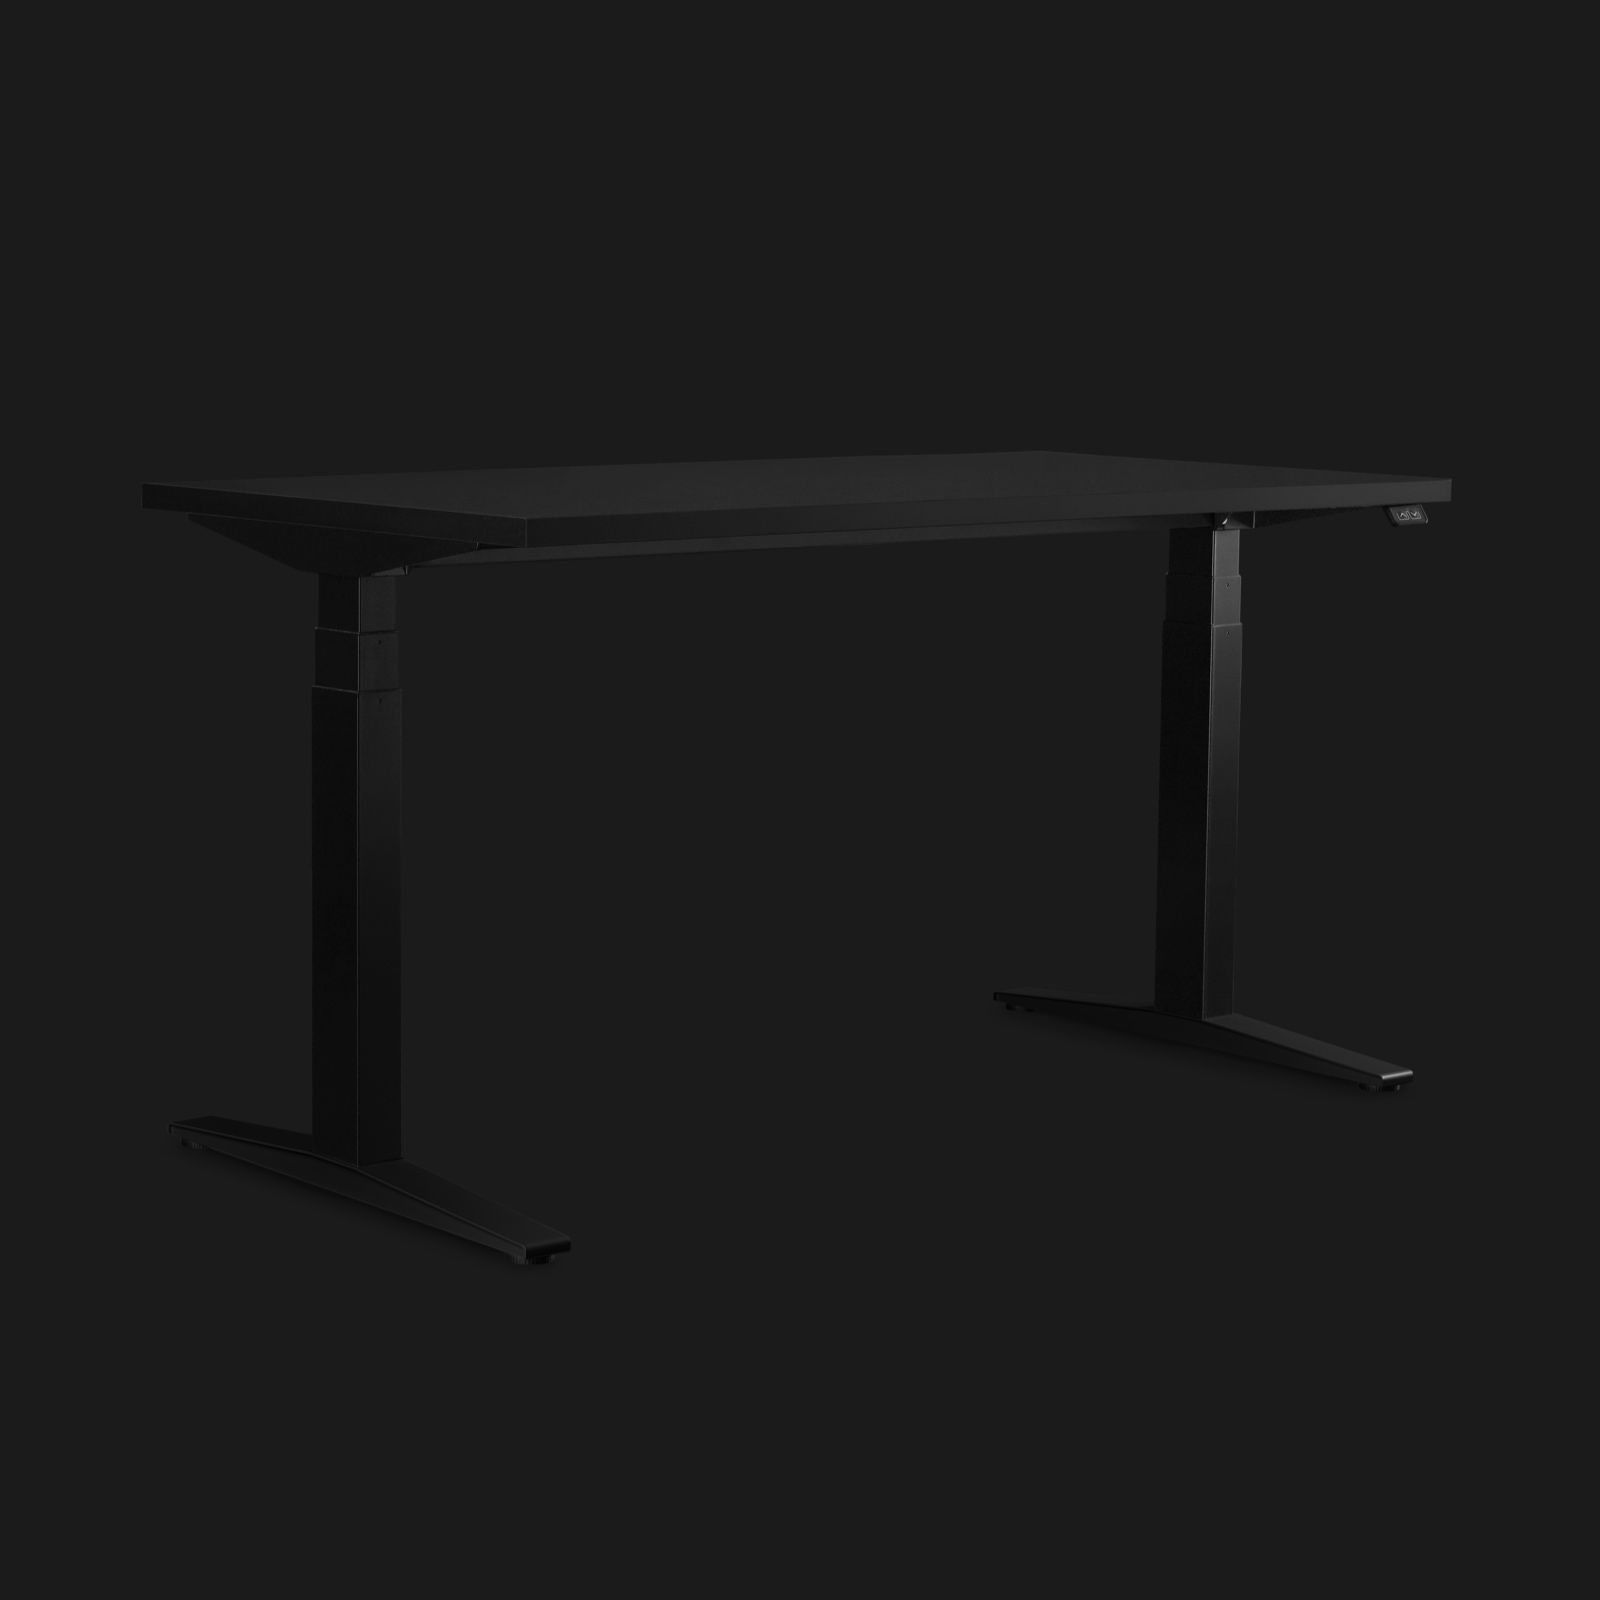 Dark grey height-adjustable Ratio Gaming Desk shown on an angle with a dramatically lit black background.